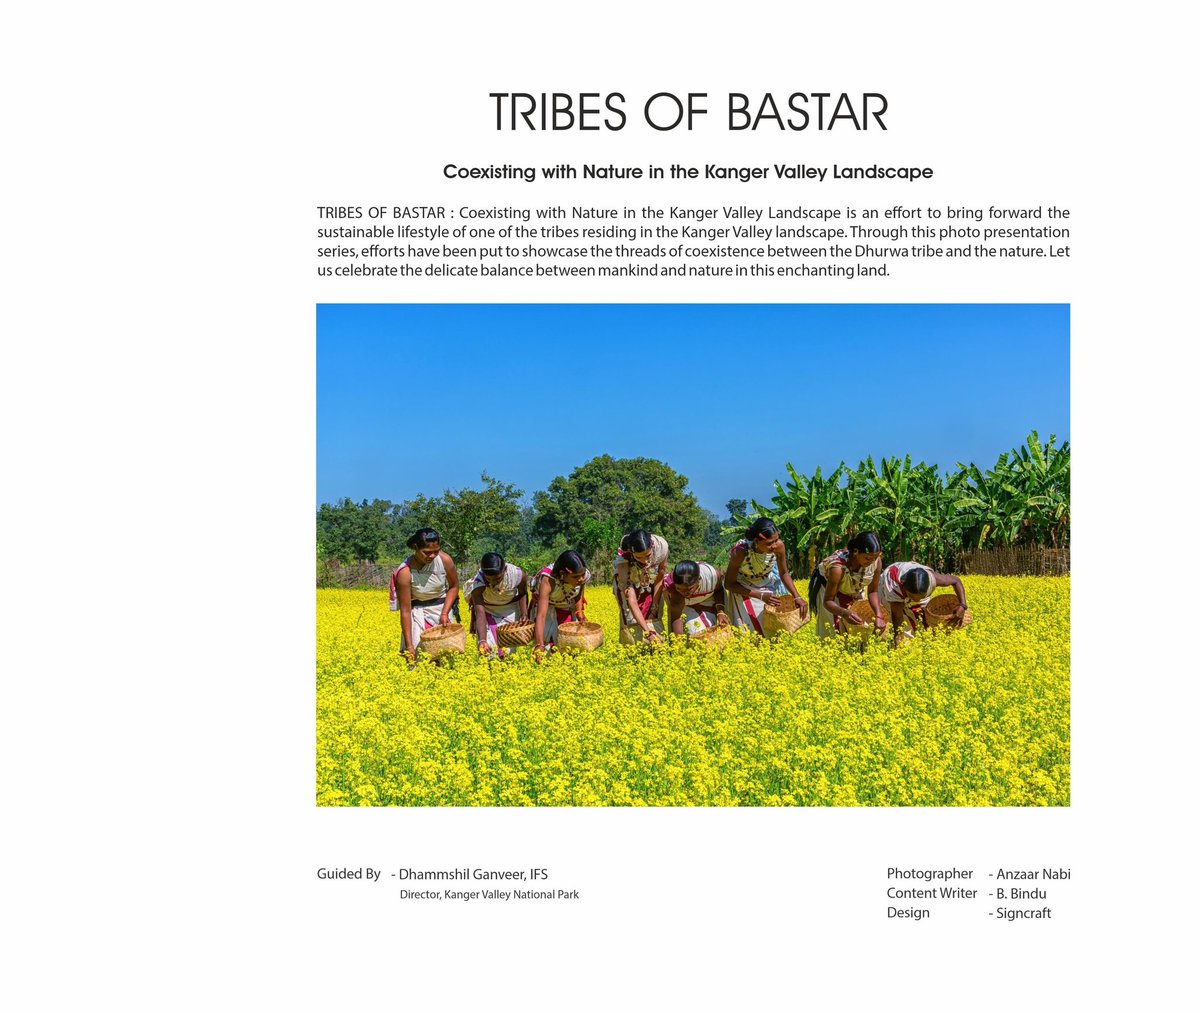 On the inaugural ceremony of Chitrakote Mahotsav, with great delight, I am sharing with you the glimpse of the launch of another Coffee Table Book 'TRIBES OF BASTAR' by Hon'ble Chief Minister of Chhattisgarh, in collaboration with Kanger Valley National Park .